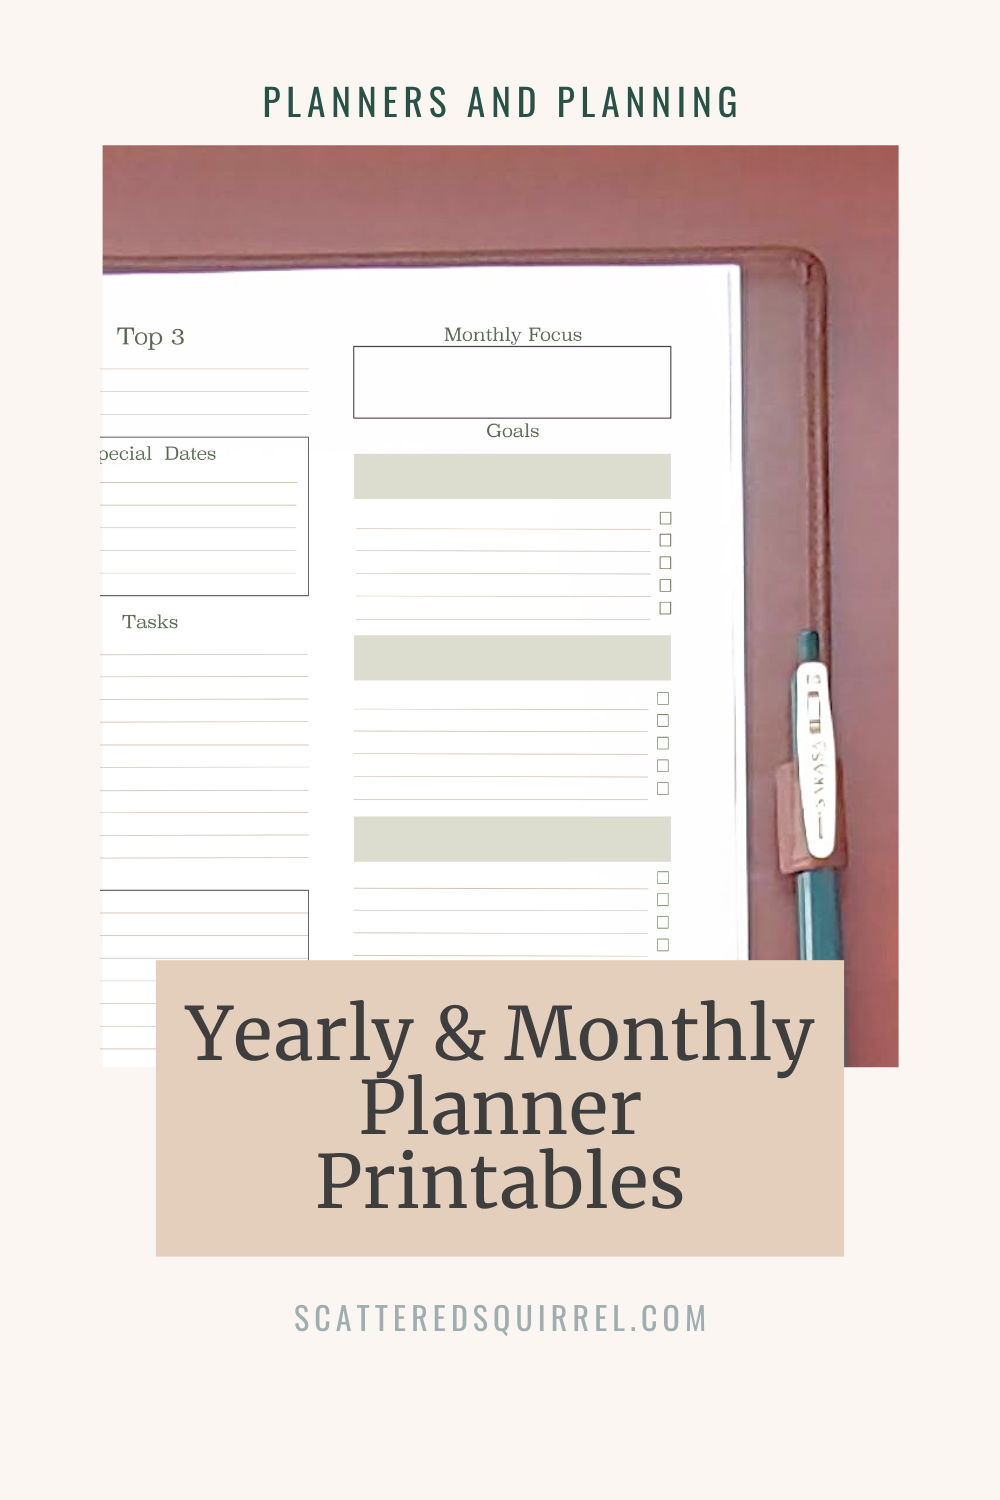 Image shows the top right two thirds for a leather planner lying open on a wooden desk. The page showing is a monthly planning page with room for priorities and tasks on one side and a monthly focus and goals on the other. The text reads "Yearly and Monthly Planner Printables."